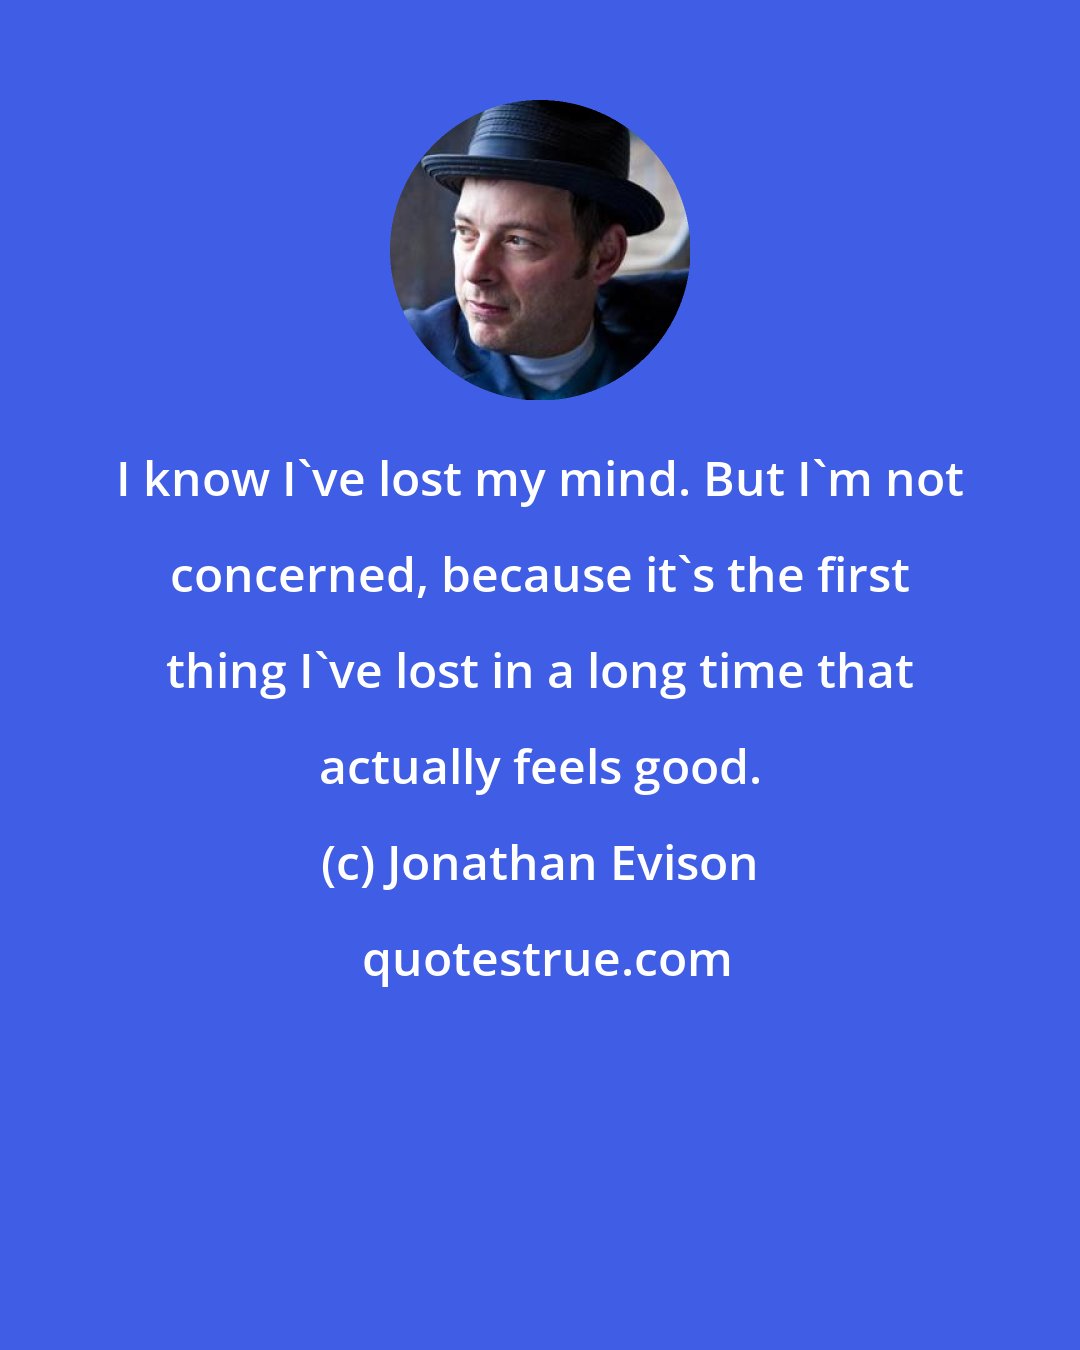 Jonathan Evison: I know I've lost my mind. But I'm not concerned, because it's the first thing I've lost in a long time that actually feels good.